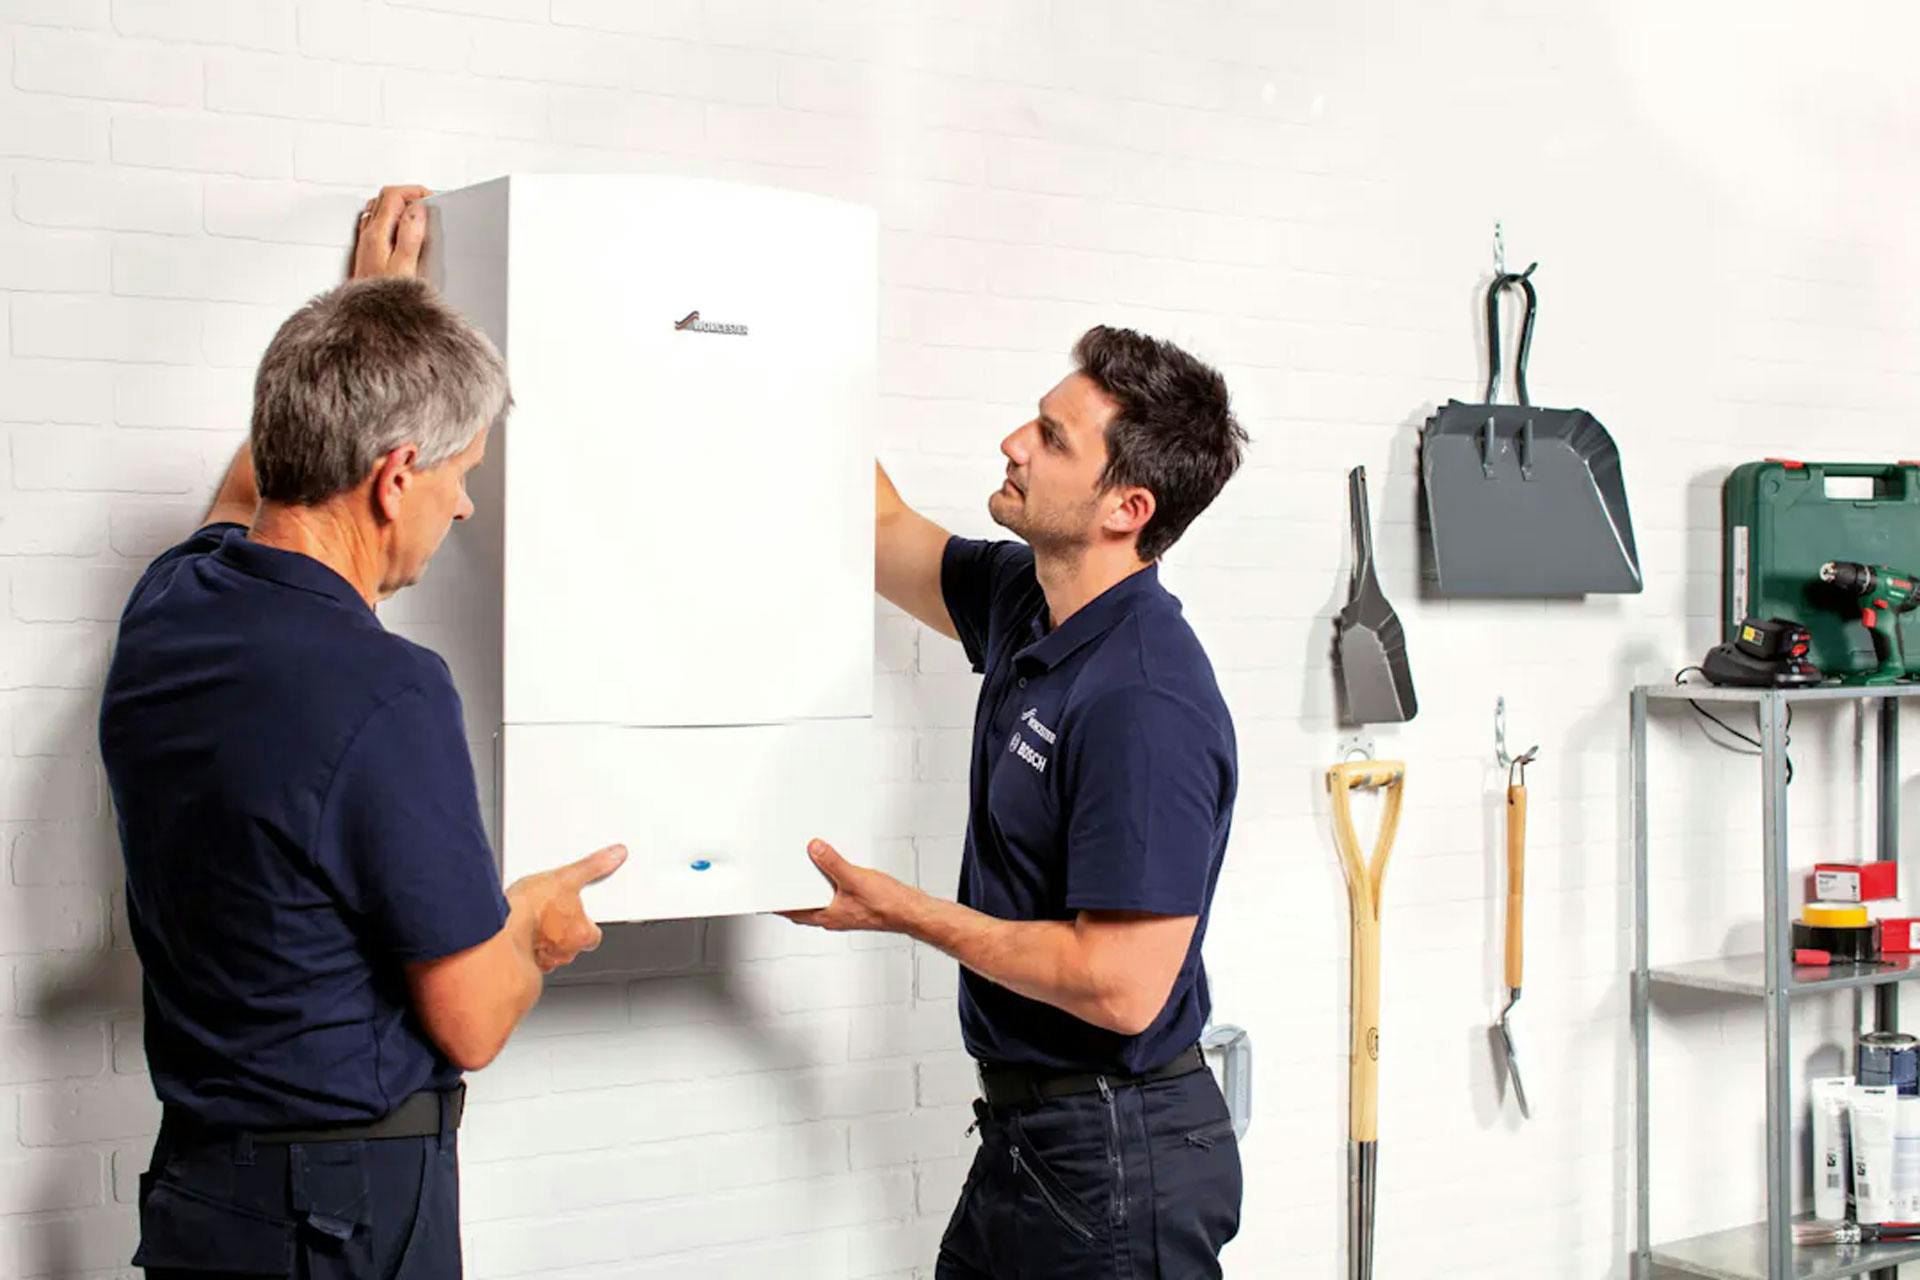 Two men installing a wall-mounted boiler in a utilities room